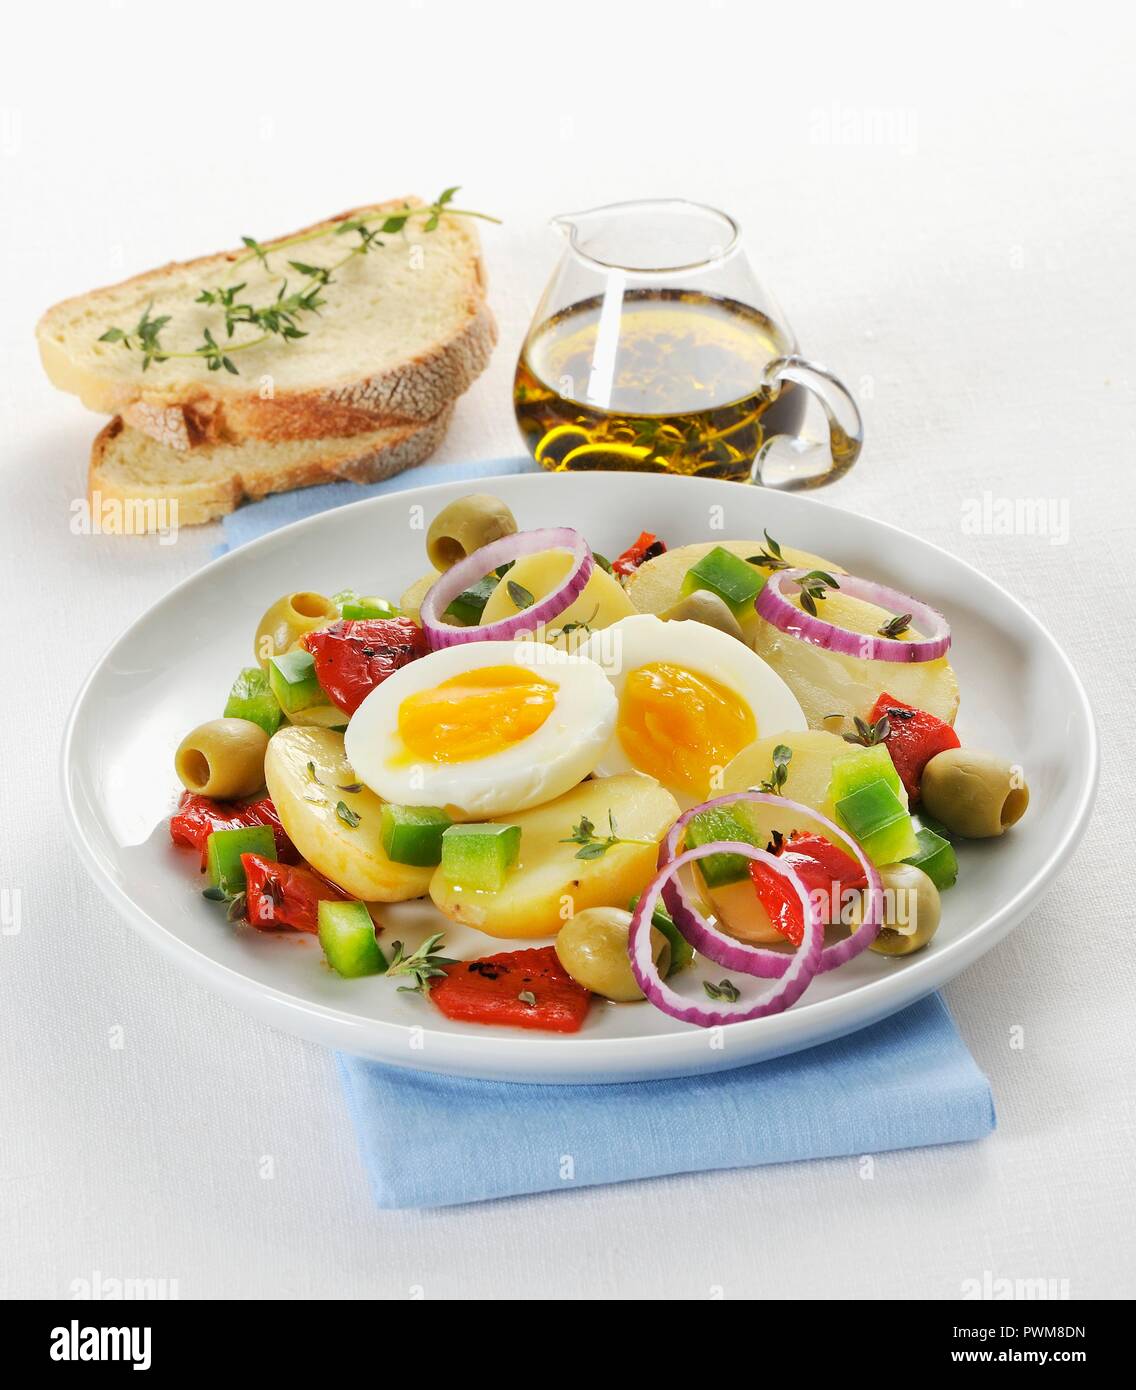 Warm potato salad with peppers, olives, onions and a soft boiled egg Stock Photo